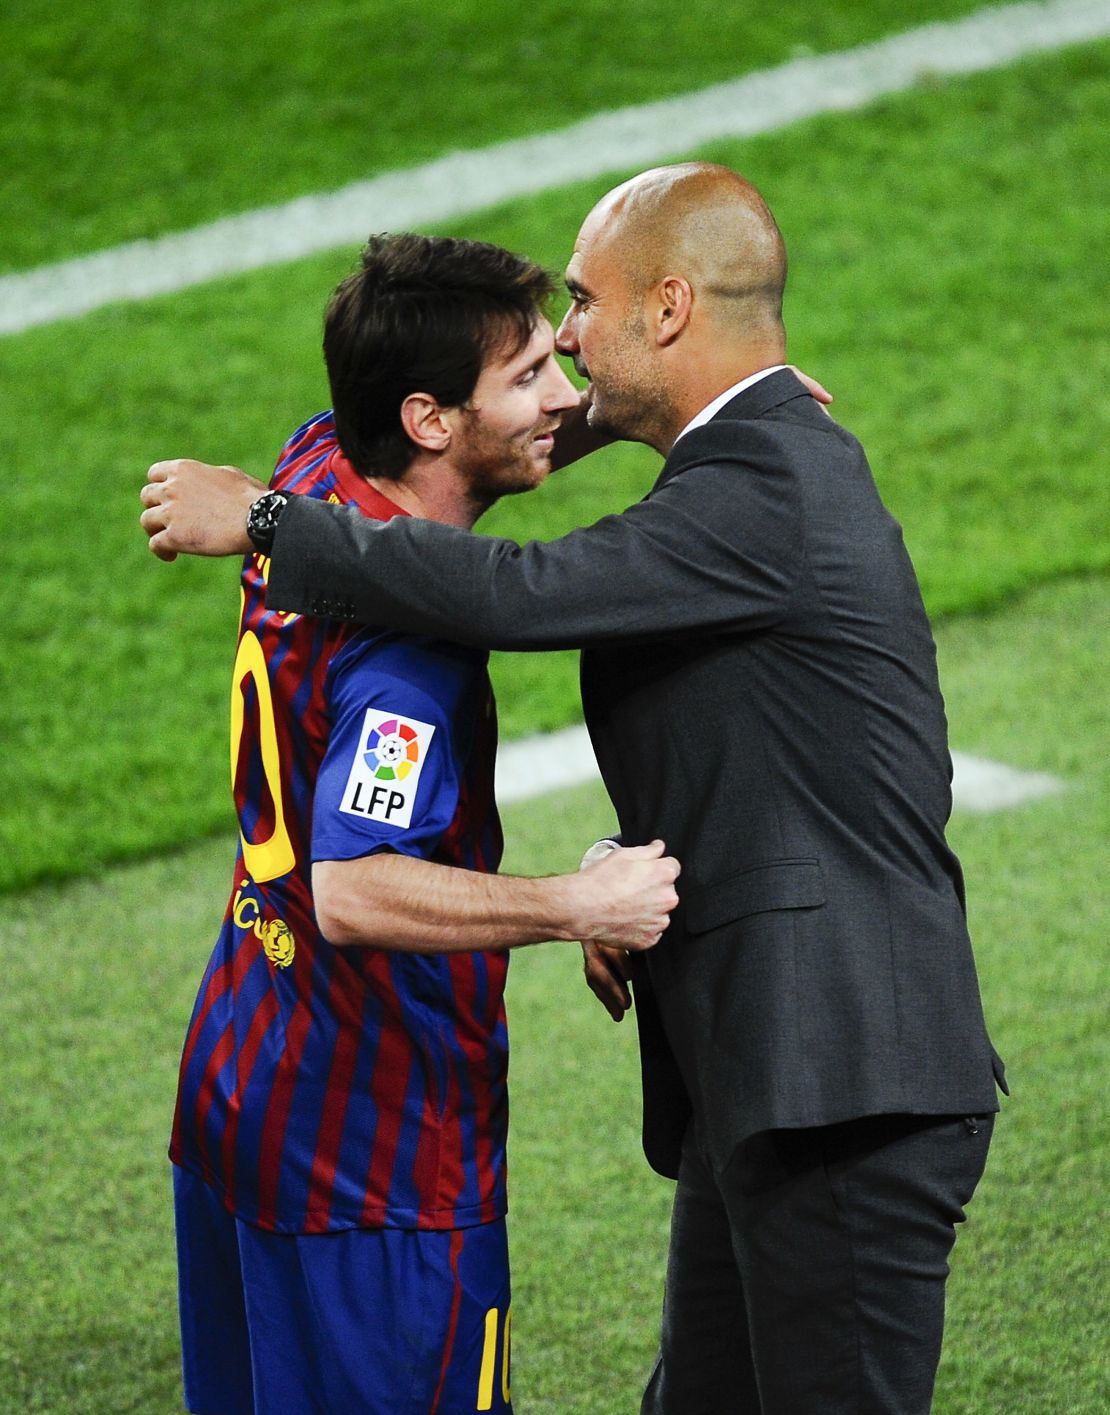 Lionel Messi and Pep Guardiola share a mutual admiration.